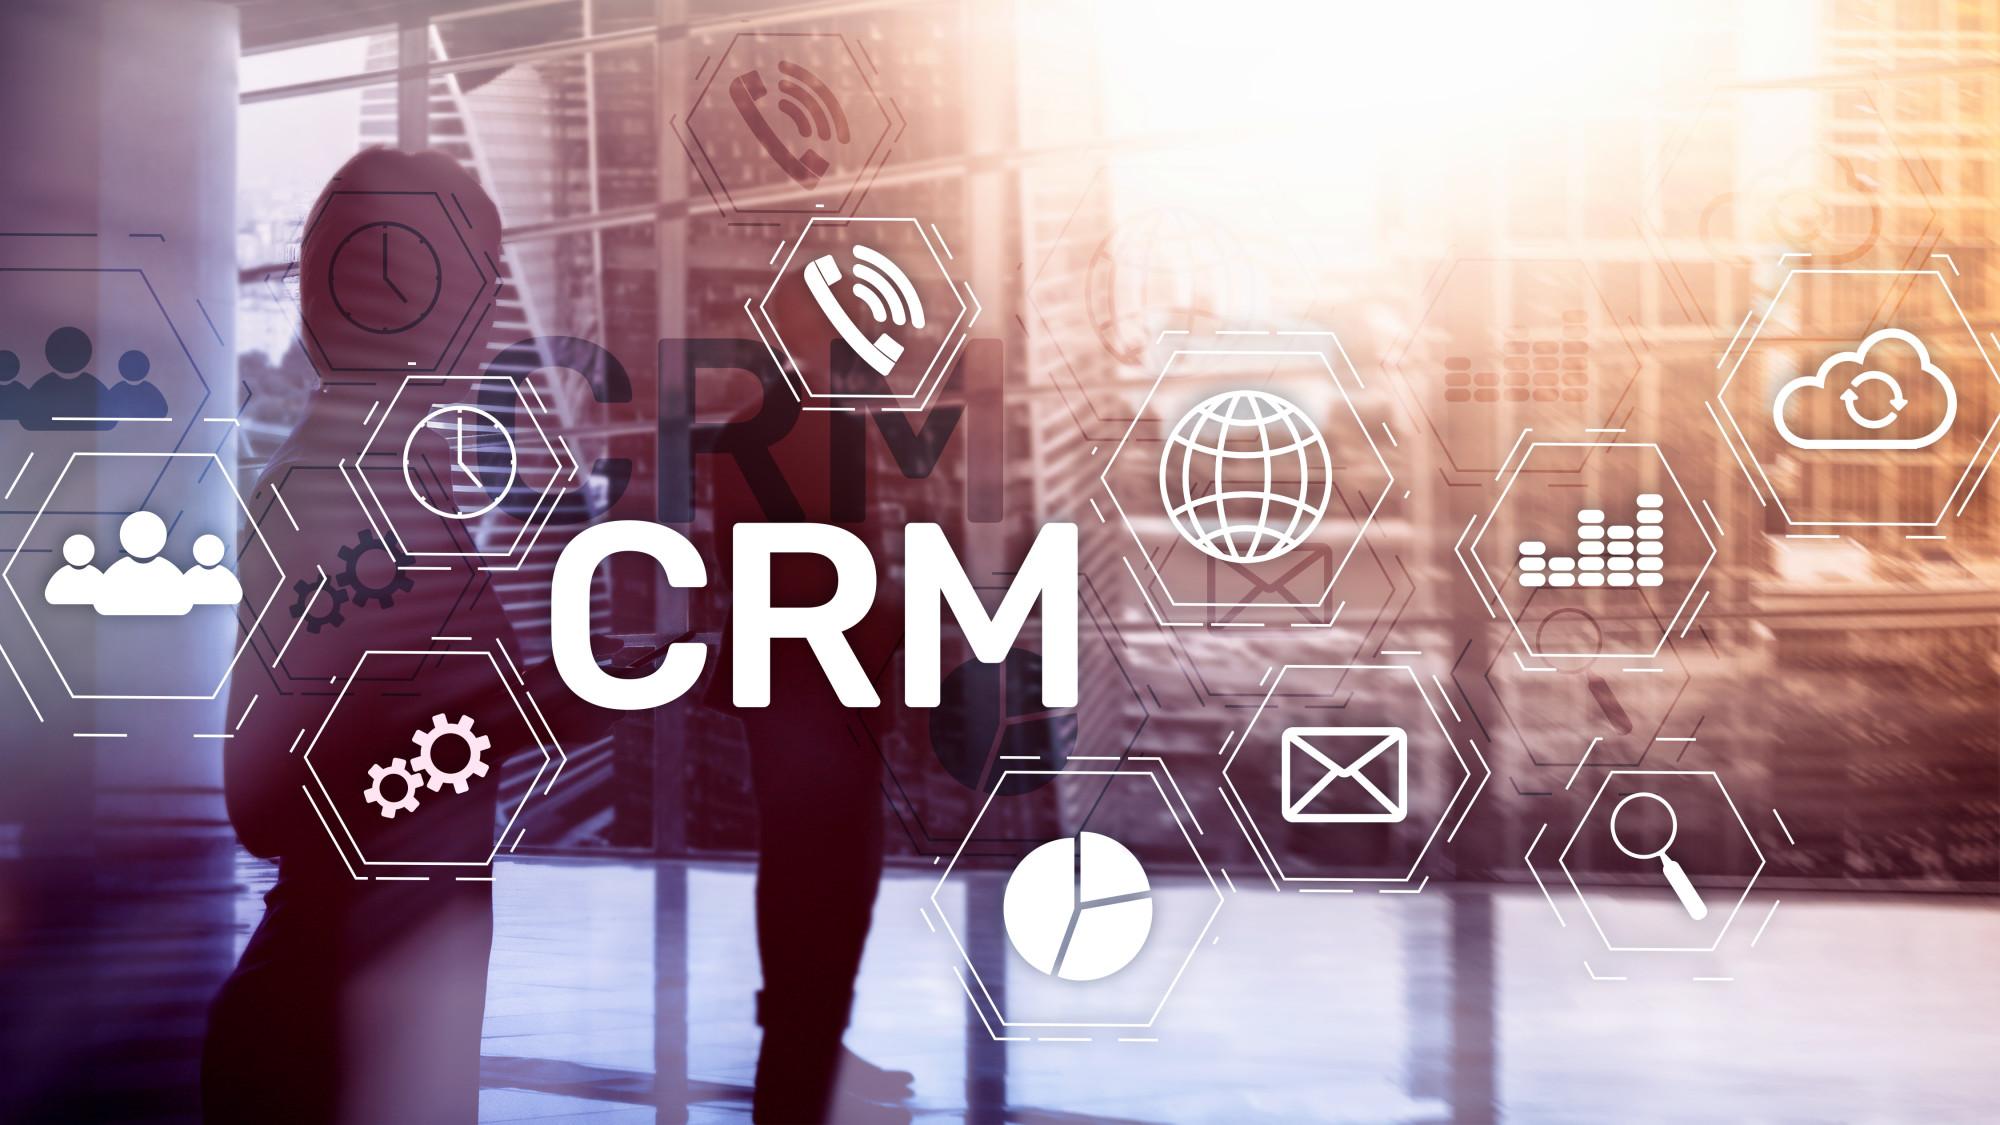 The Best Tools for the Job: How to Choose Among Different Types of CRM Software